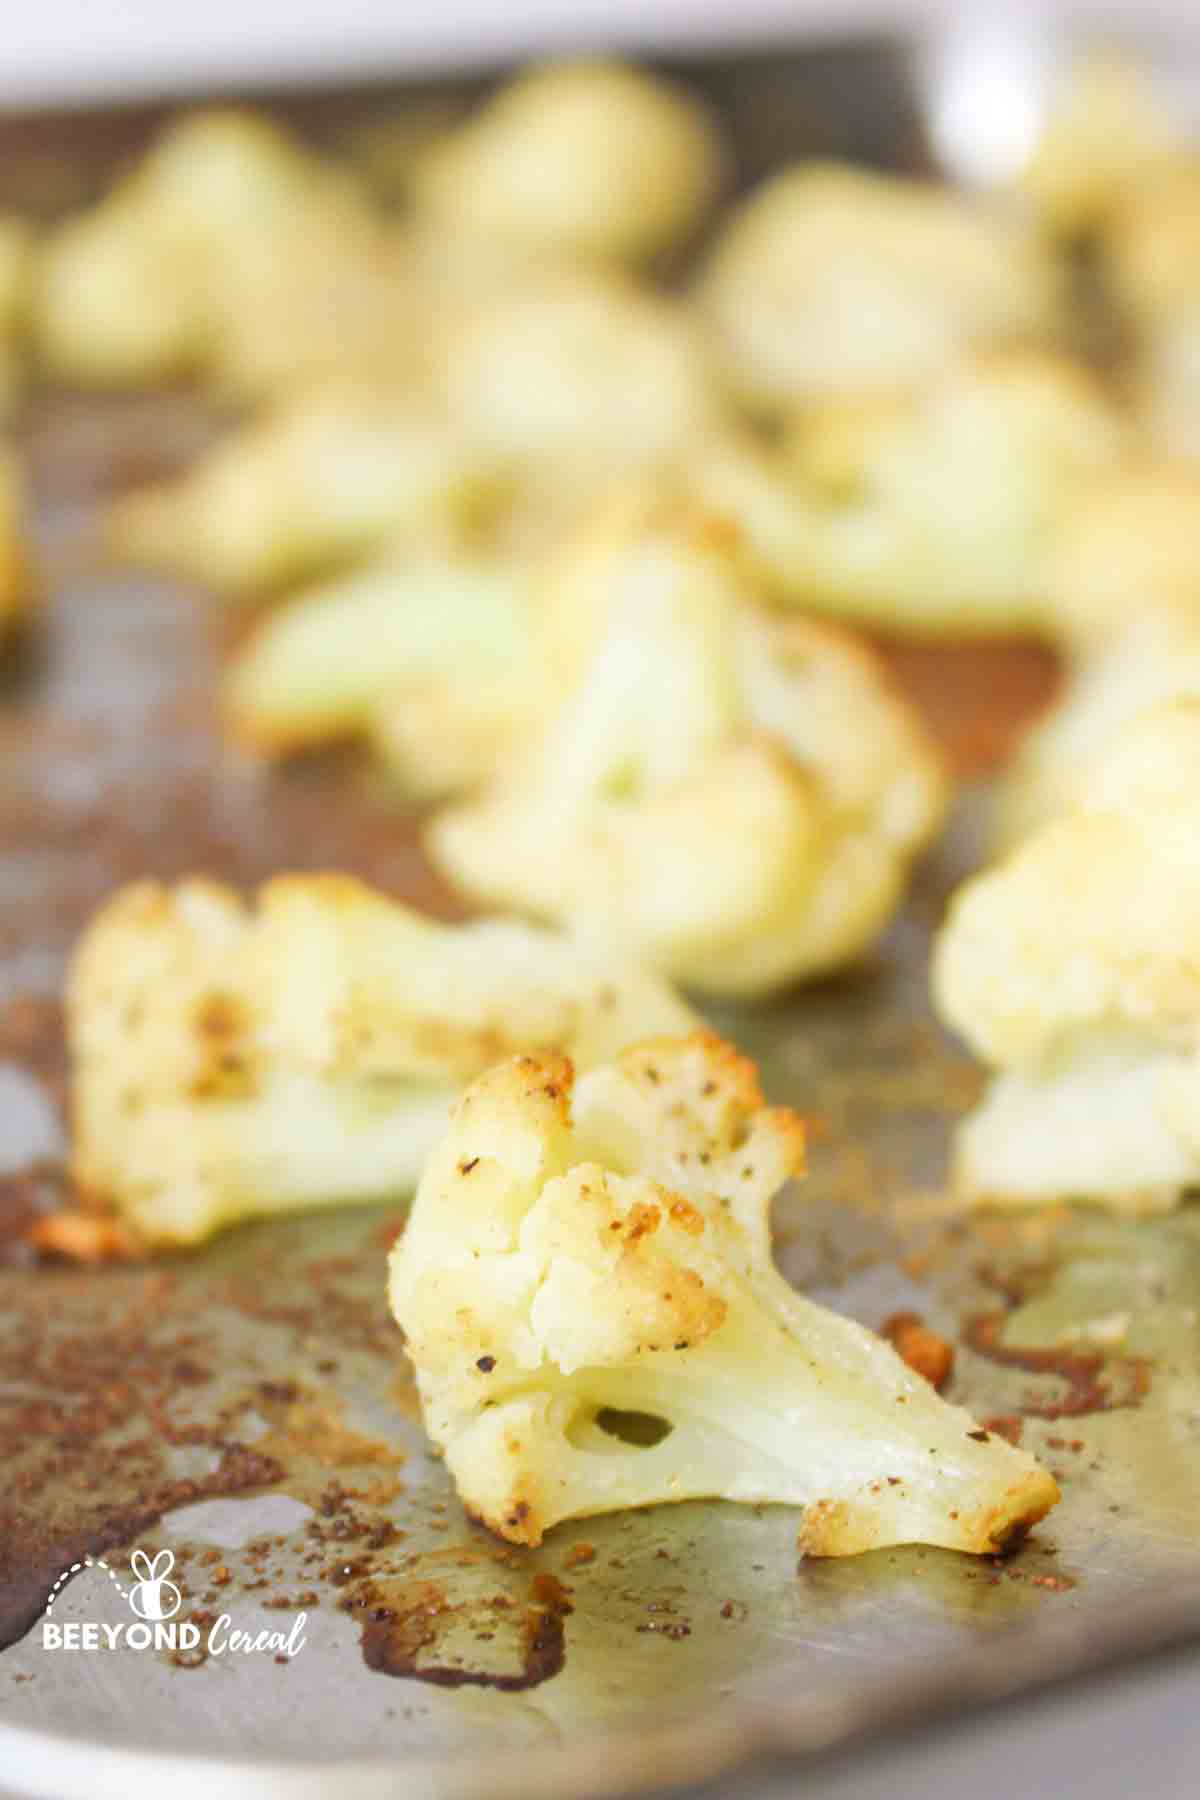 an upclose view of a roasted piece of cauliflower on a baking sheet